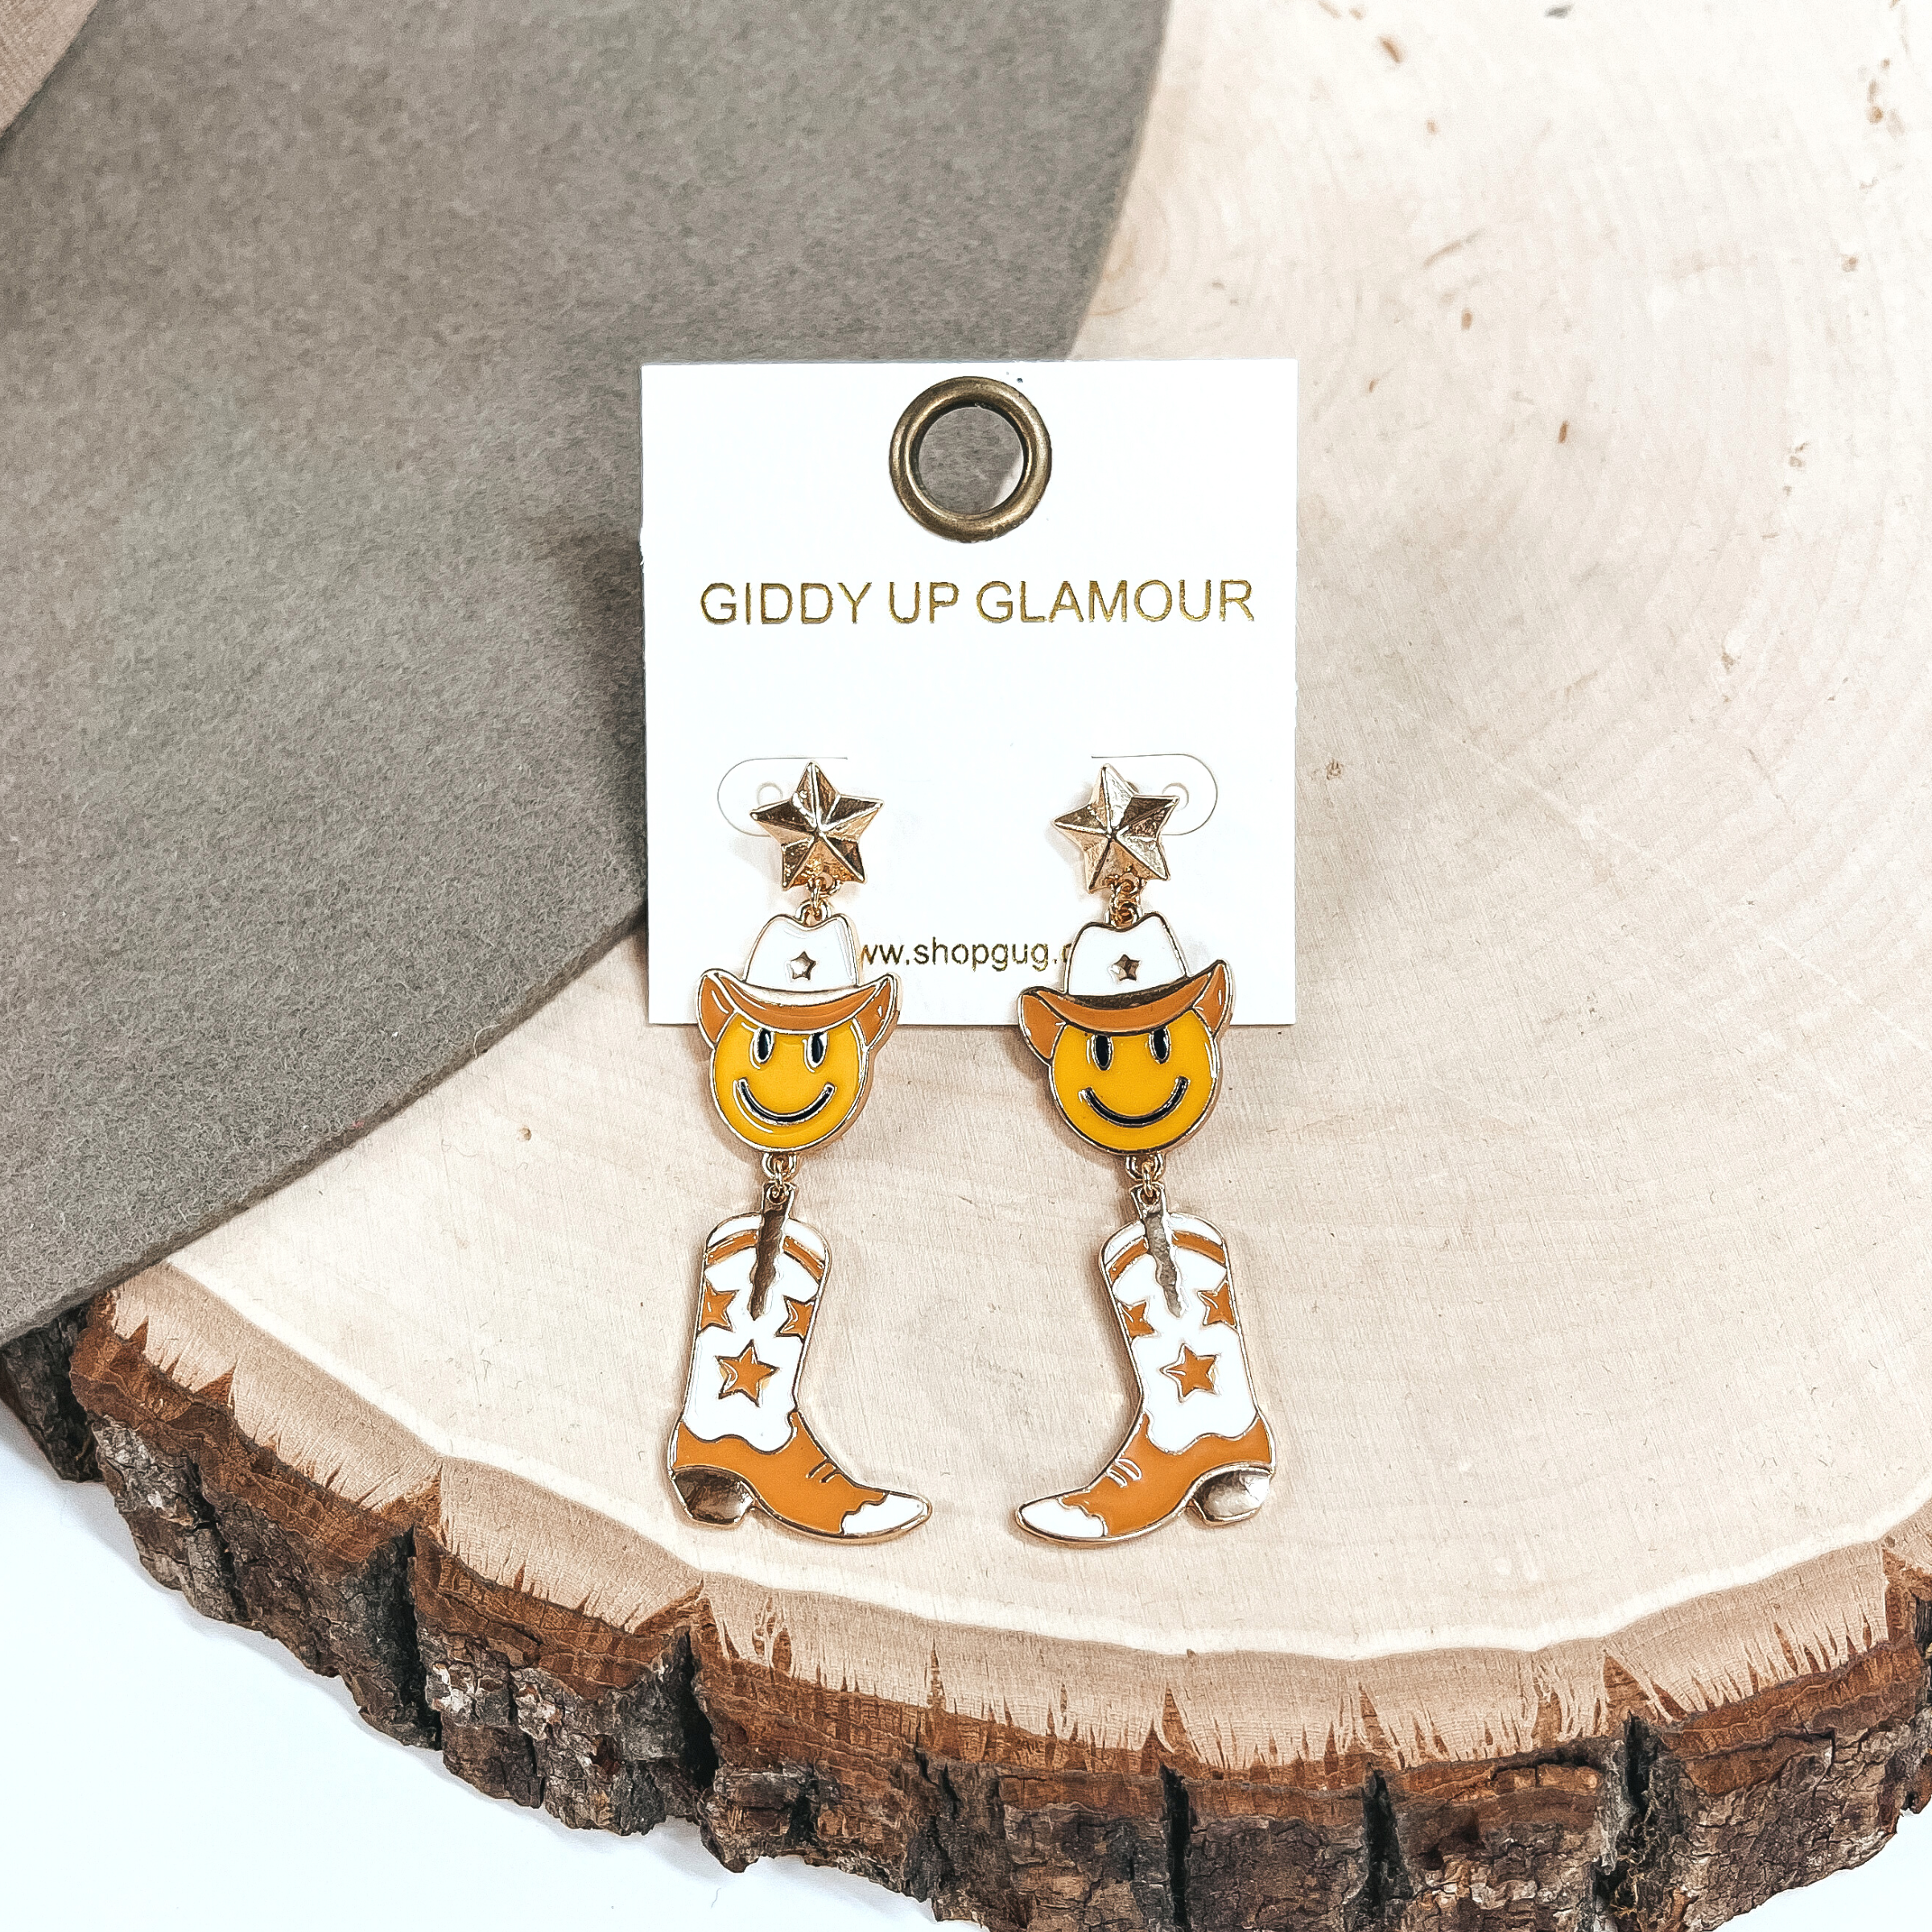 On The Fly Gold Tone Star Post Earrings with Happy Face Cowboy and Boot Pendant Earrings in Ivory - Giddy Up Glamour Boutique